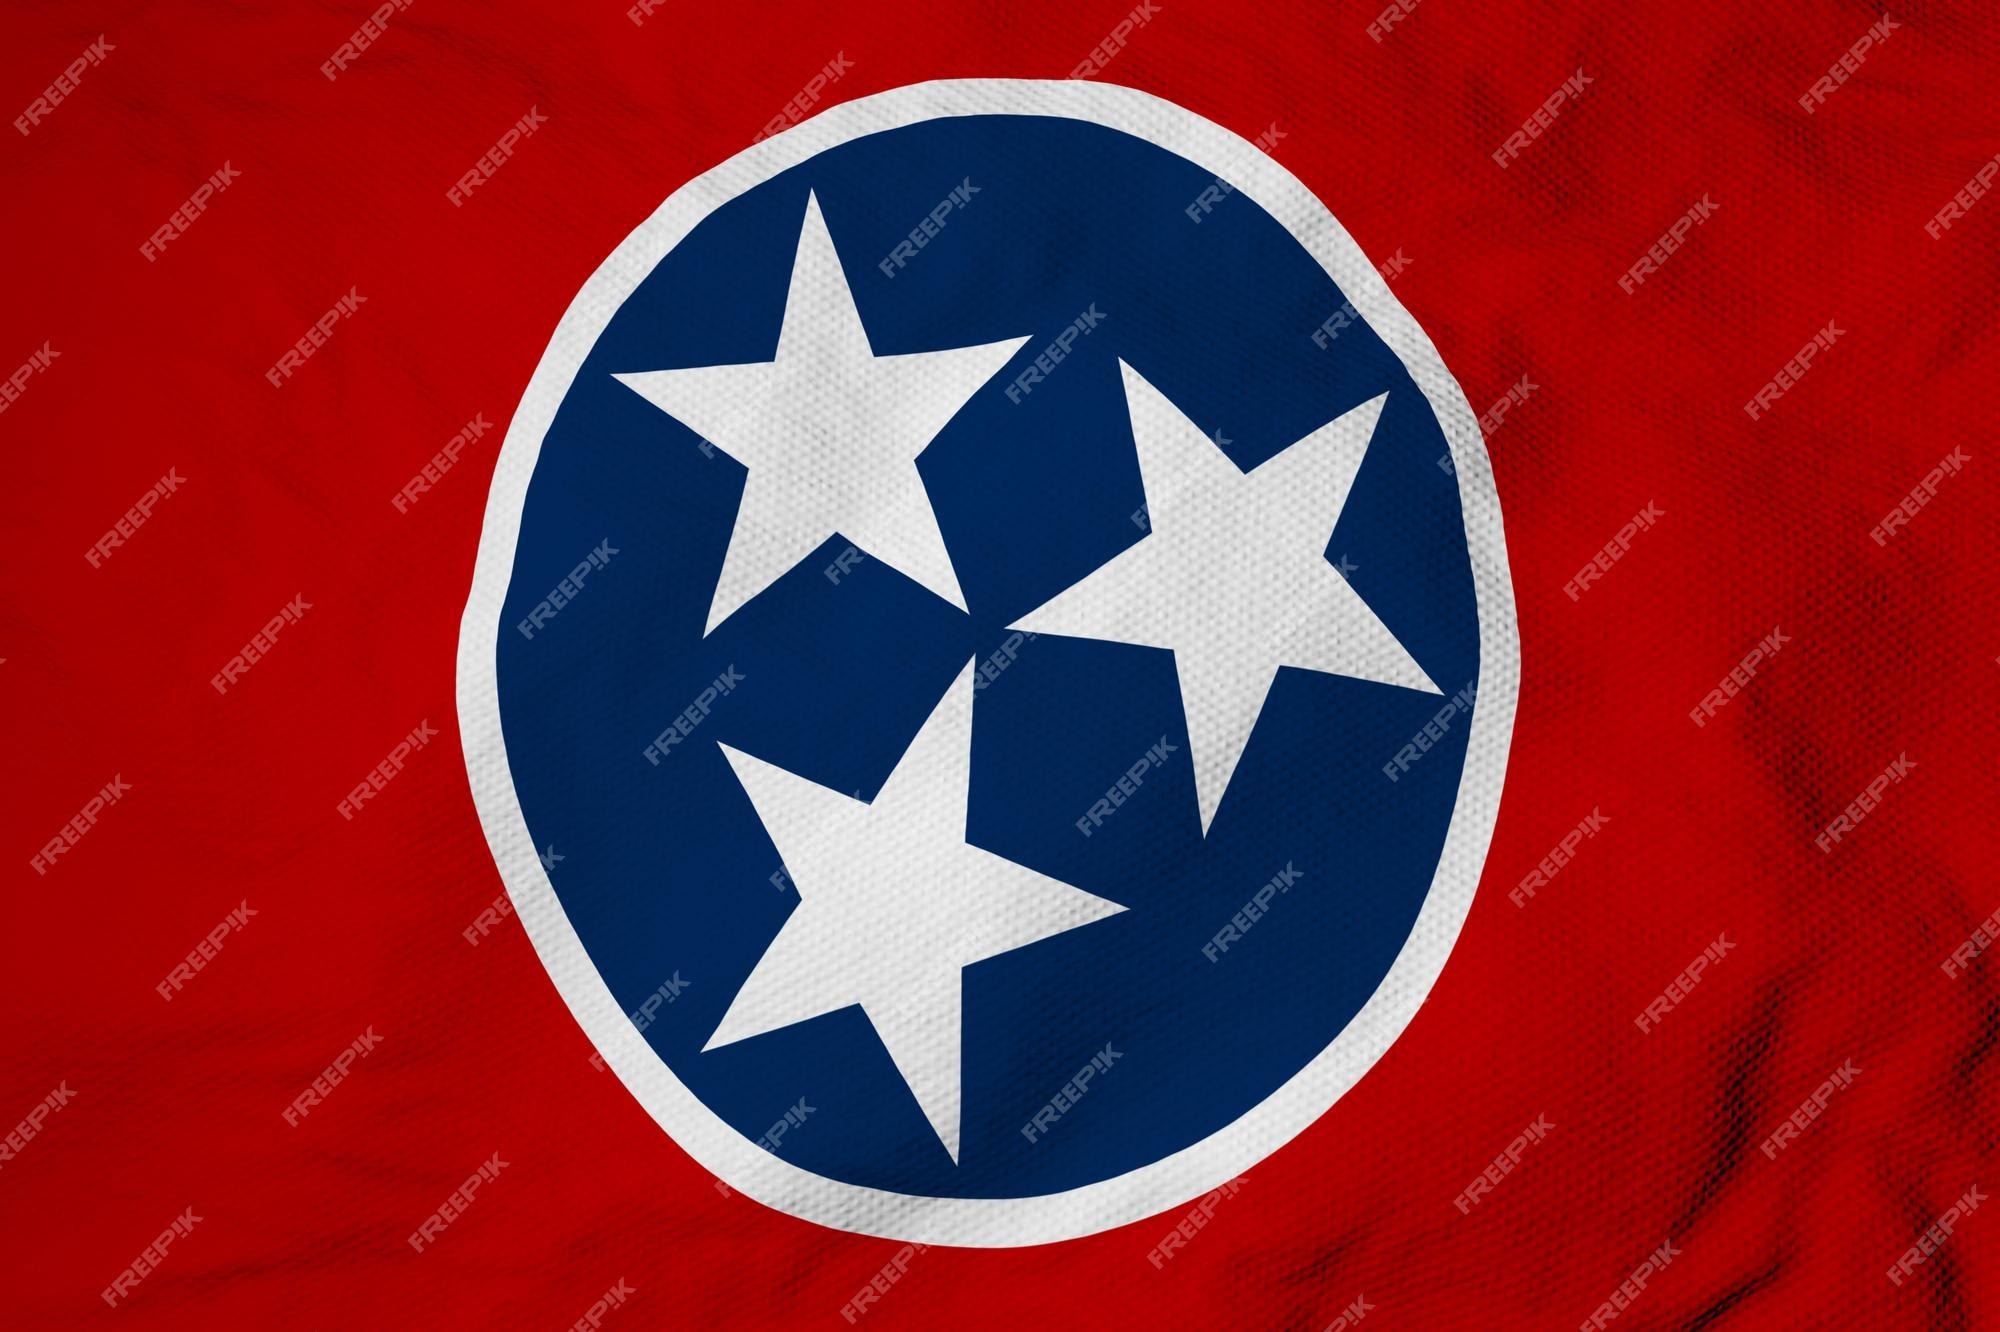 Premium Photo Full Frame Closeup On A Waving Flag Of Tennessee